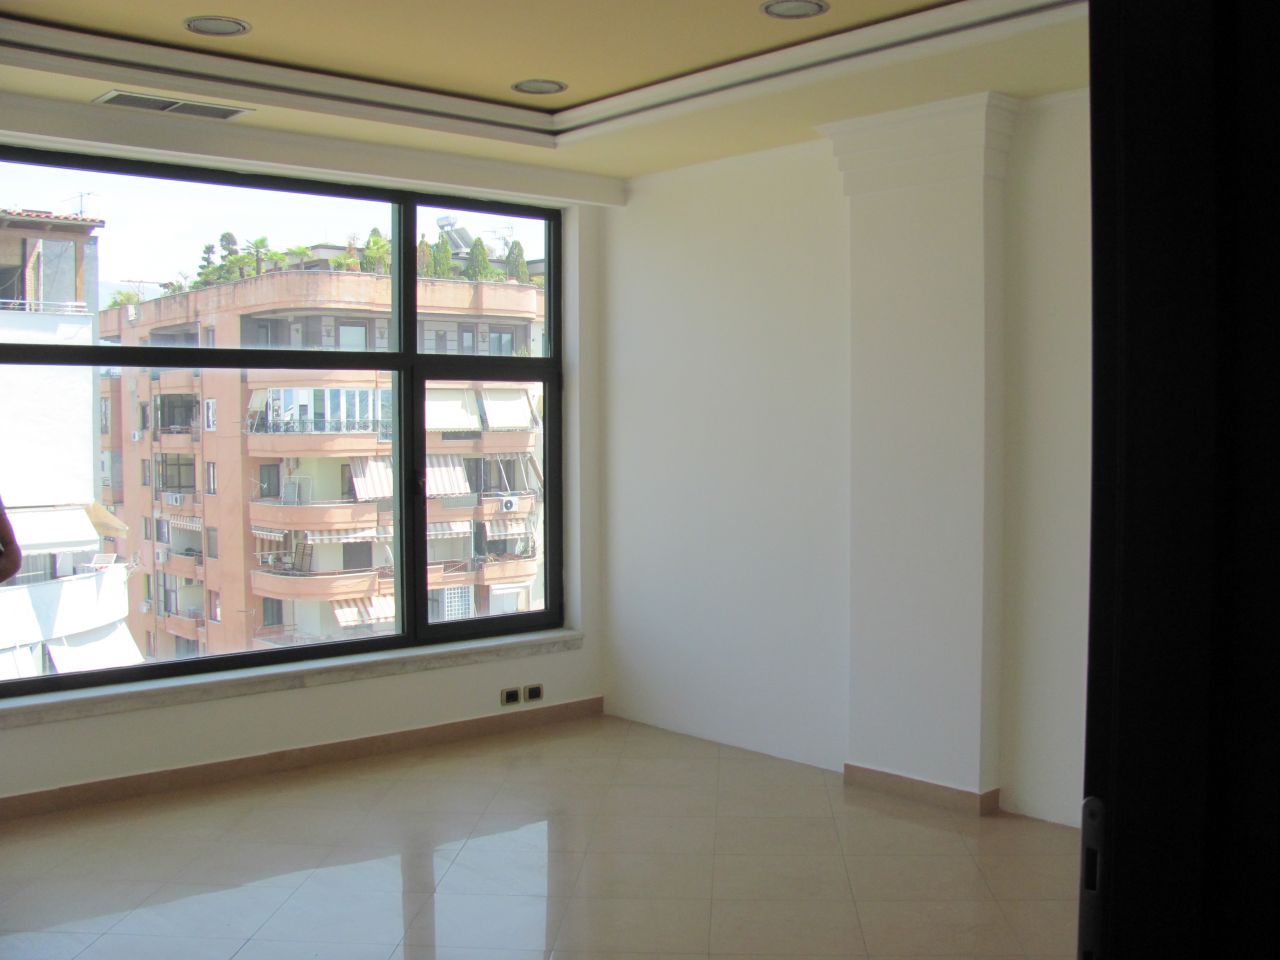 Office for Rent in the center of Tirana, the capital of Albania. 